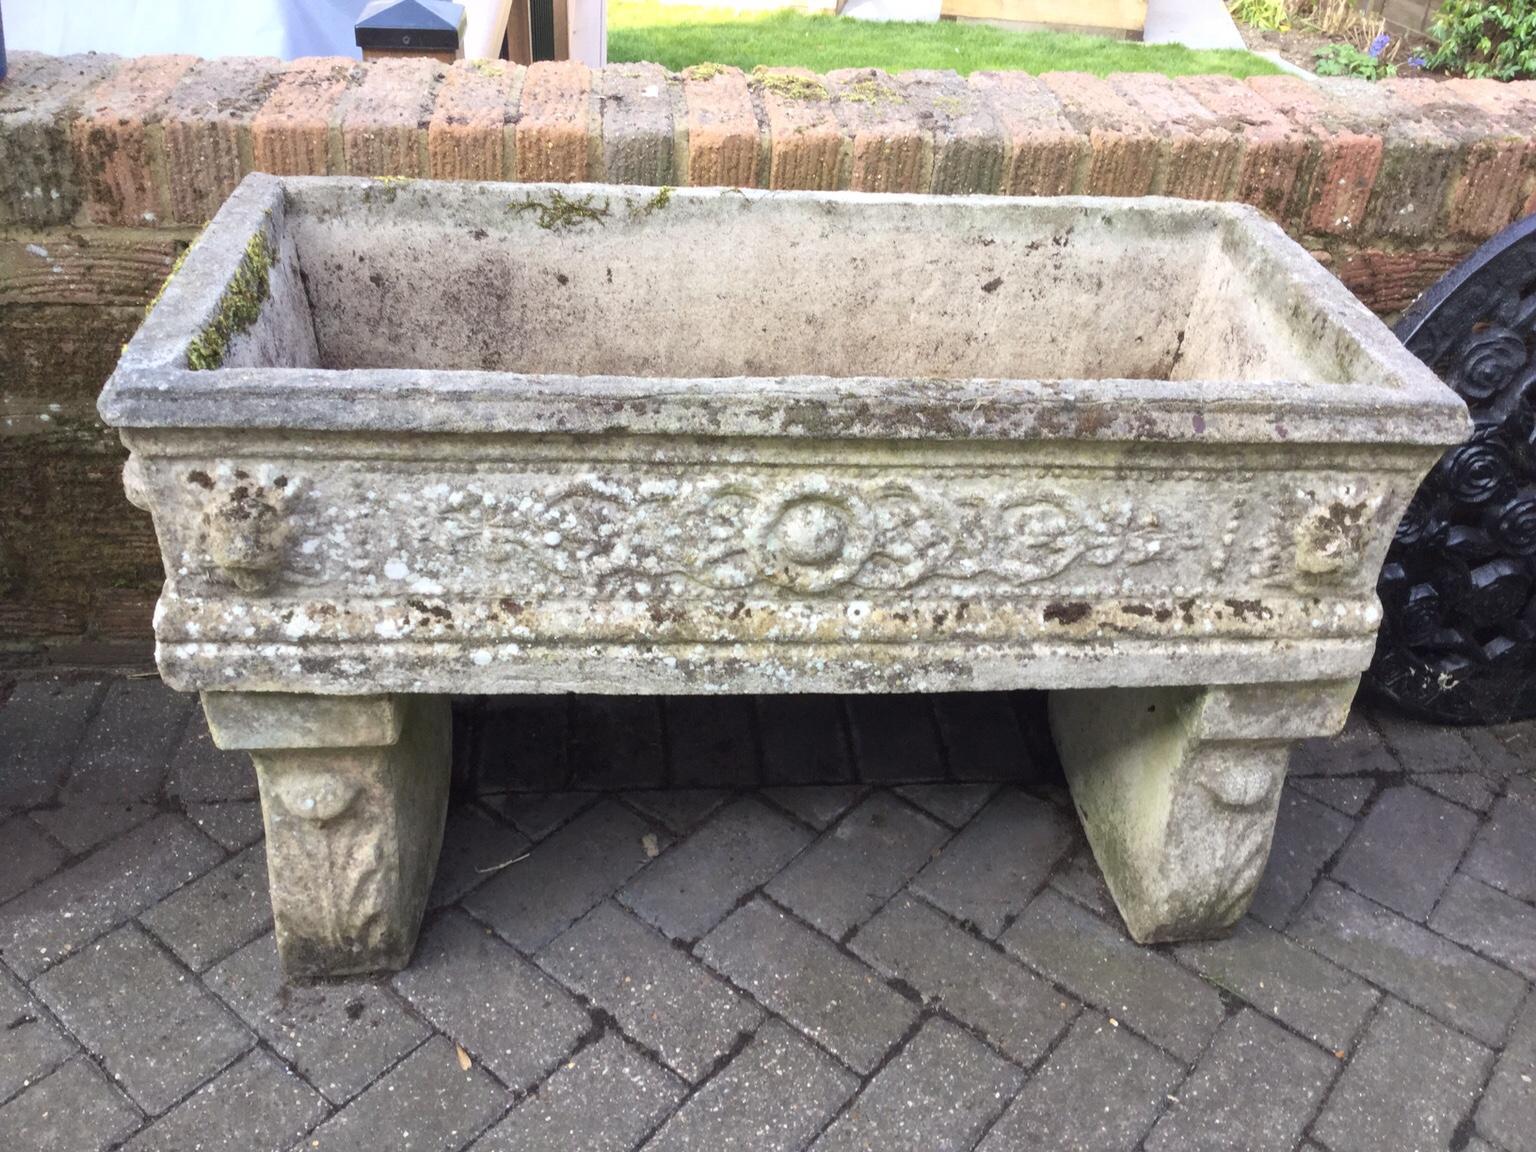 Vintage stone/concrete garden trough/planter in Brentwood for £48.00